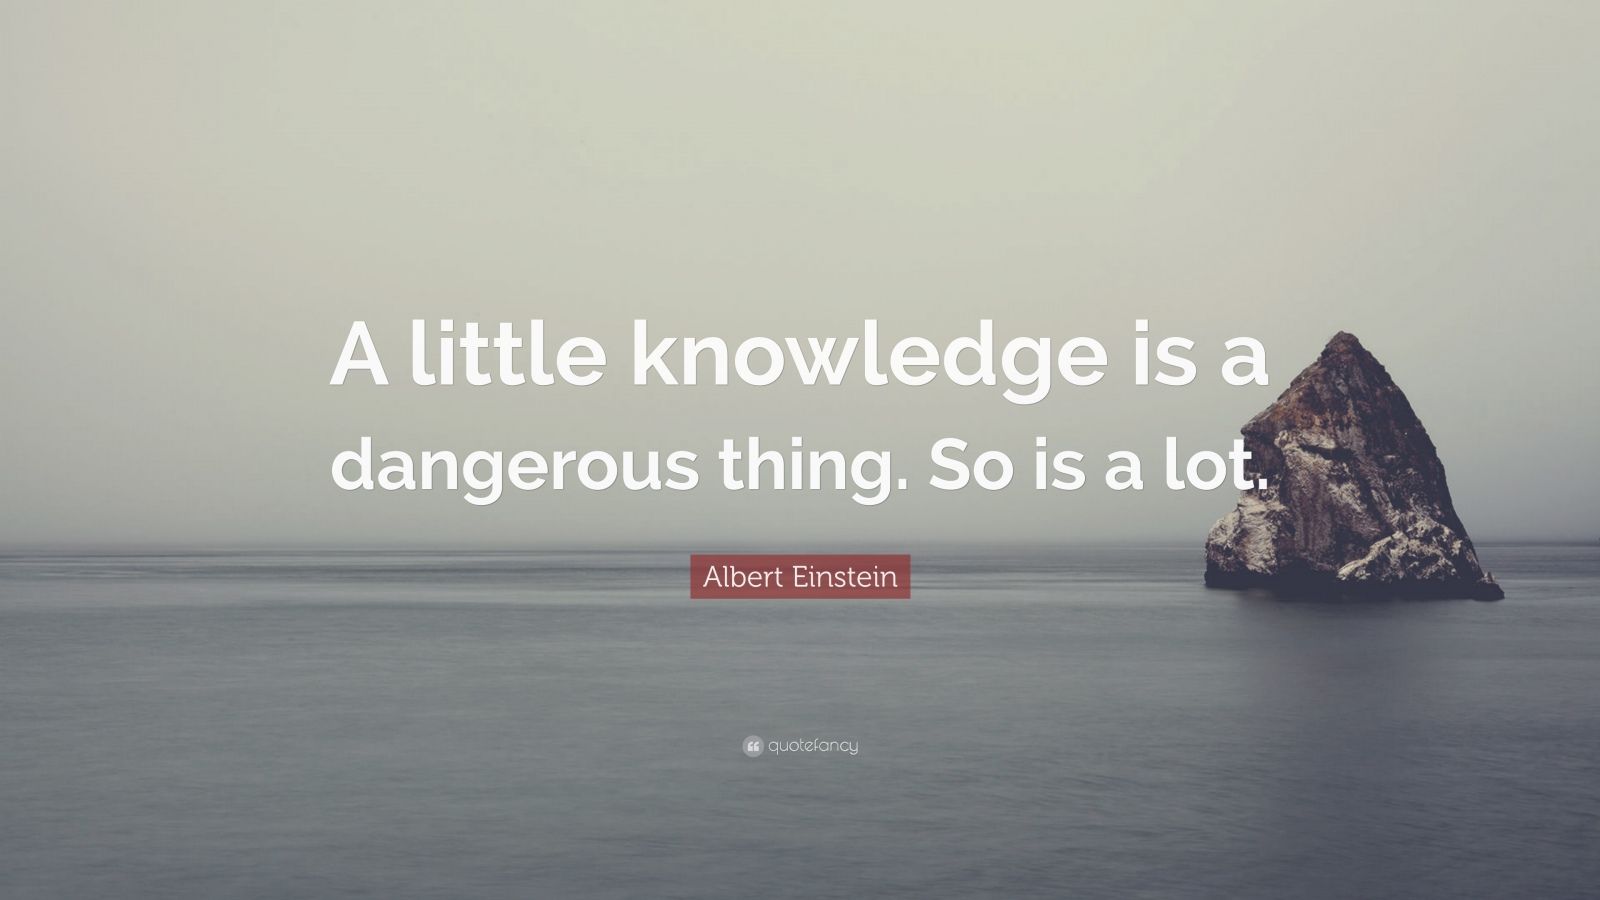 Albert Einstein Quote: “A little knowledge is a dangerous thing. So is ...